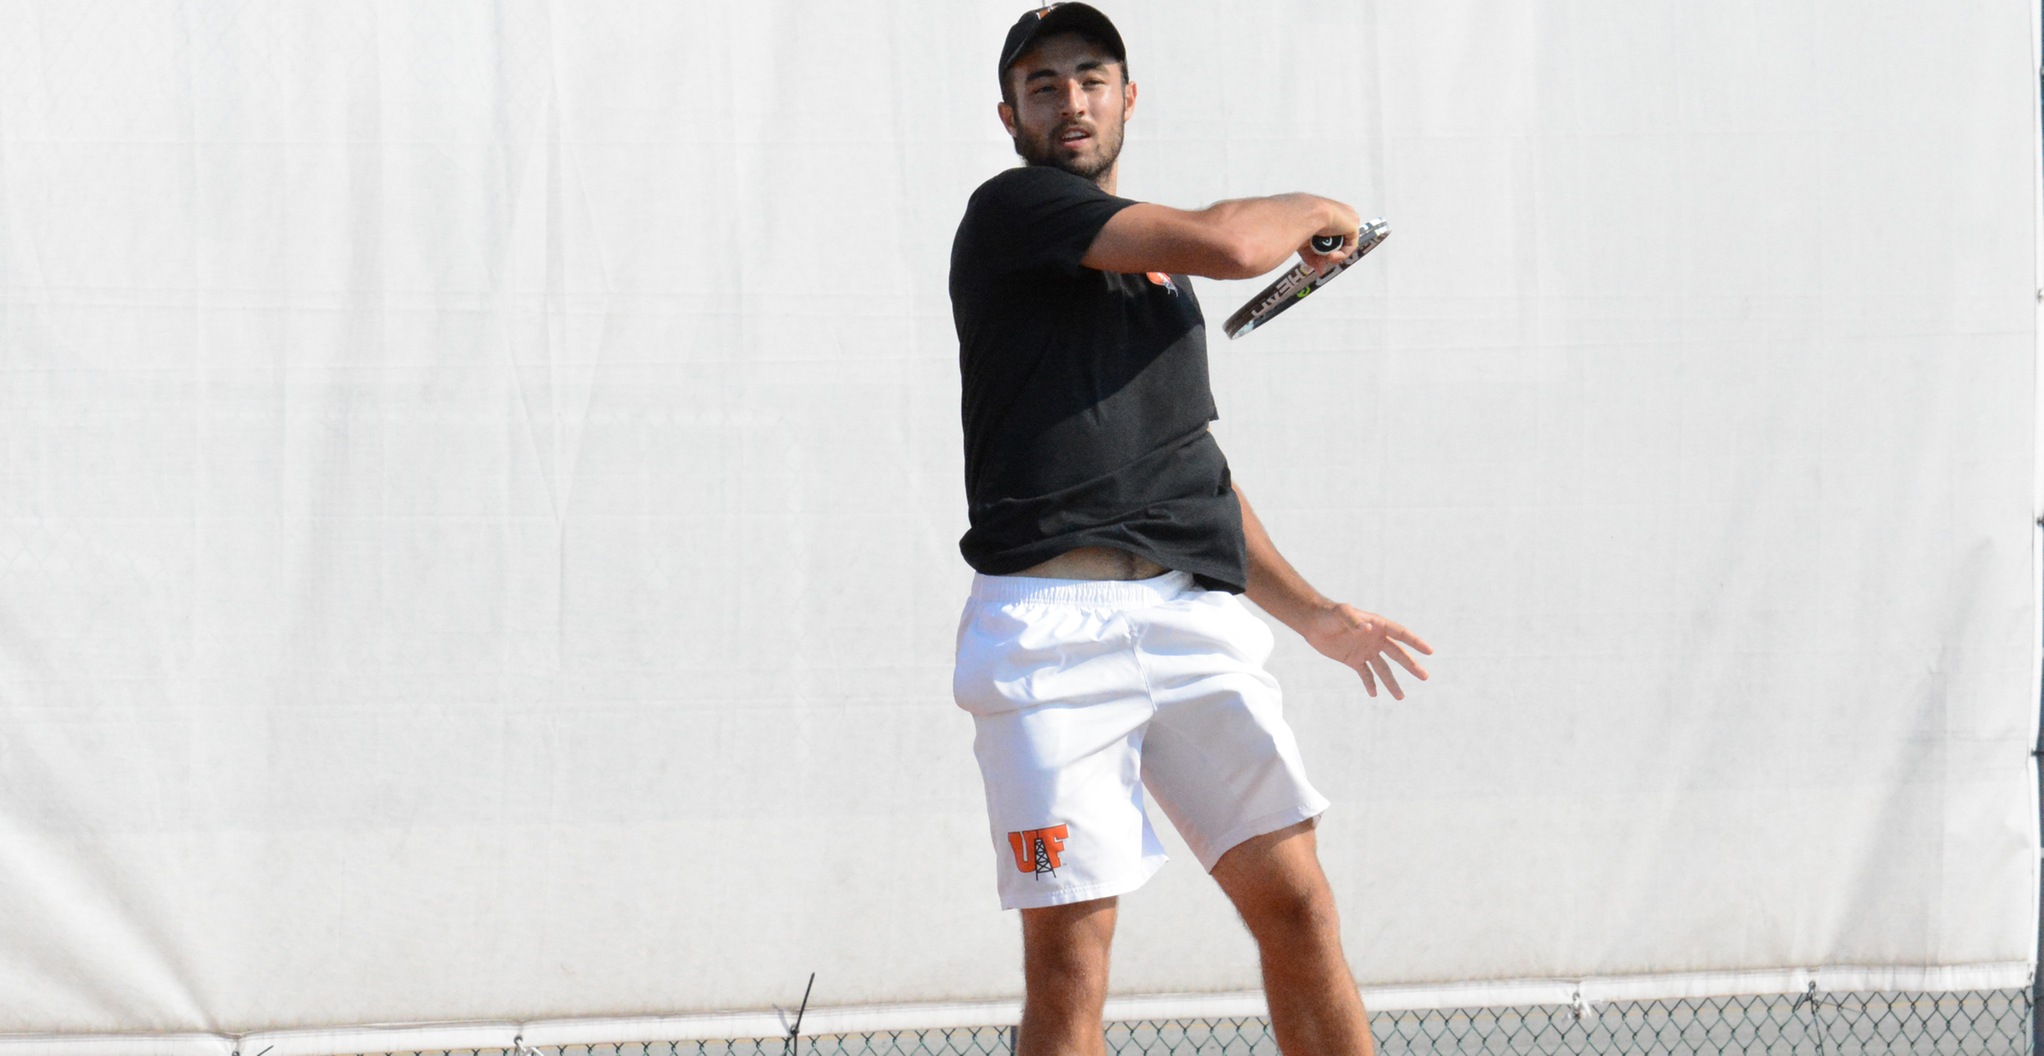 Oilers Complete Day 2 at ITA